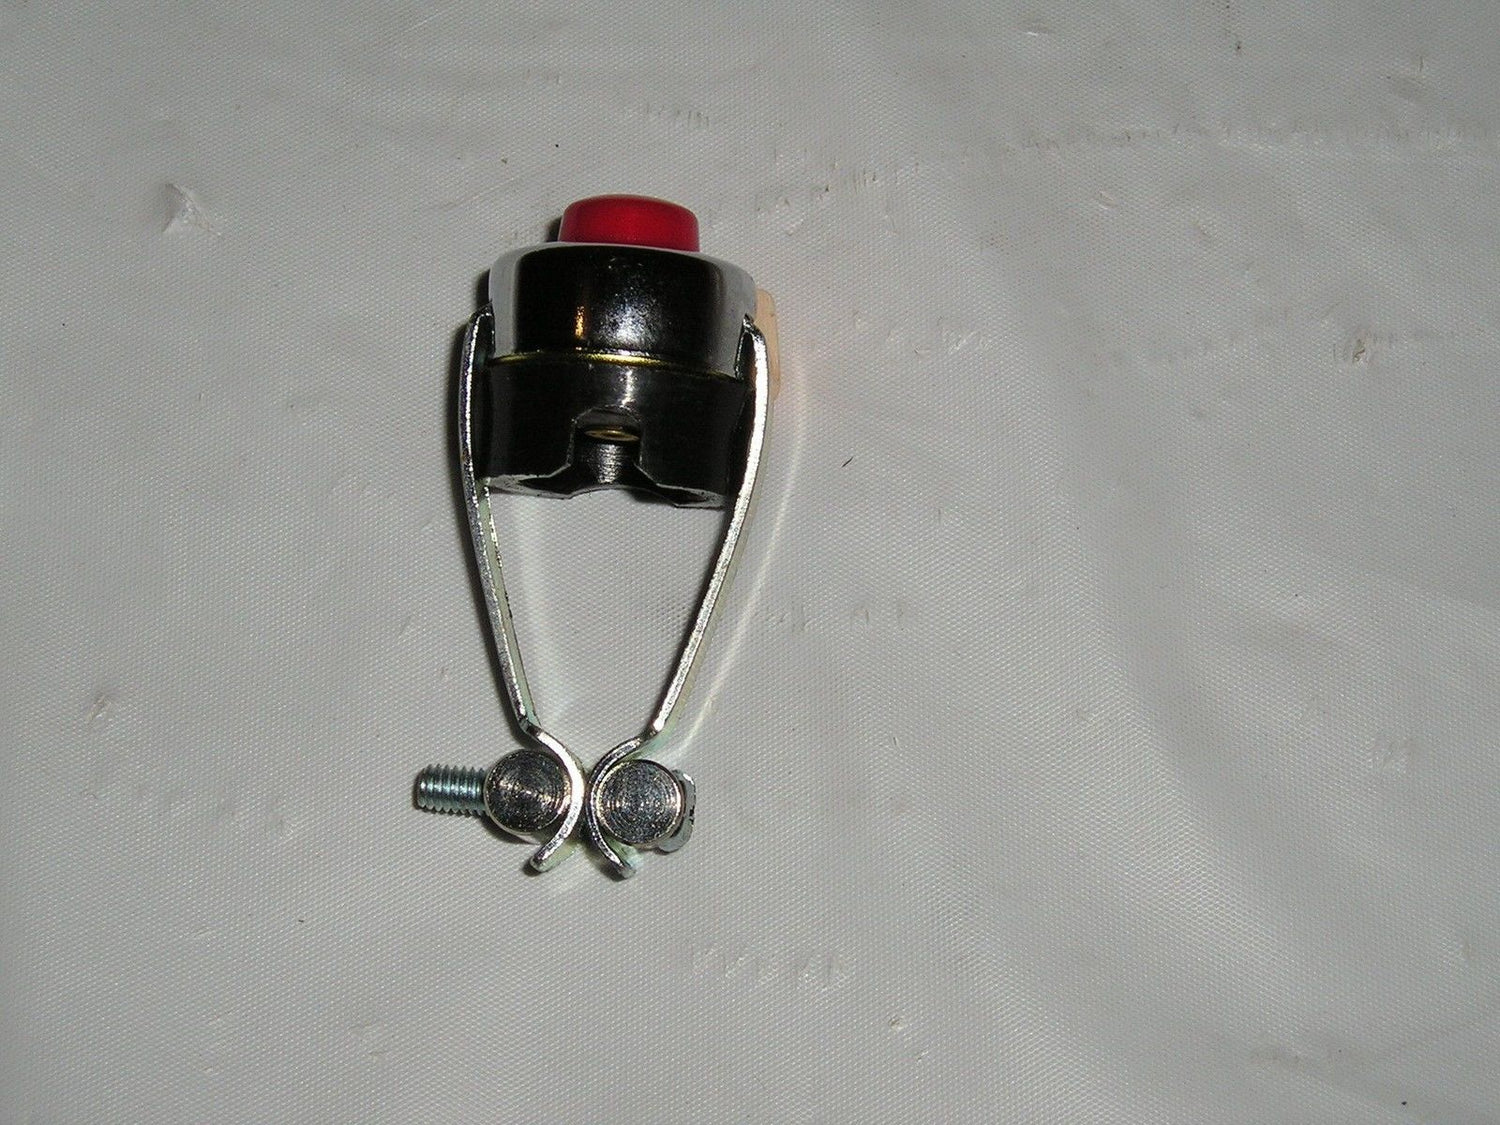 Norton Ignition System - Boyer Electronic Ignition / Ignition Coil / Point & Condenser/ Etc.